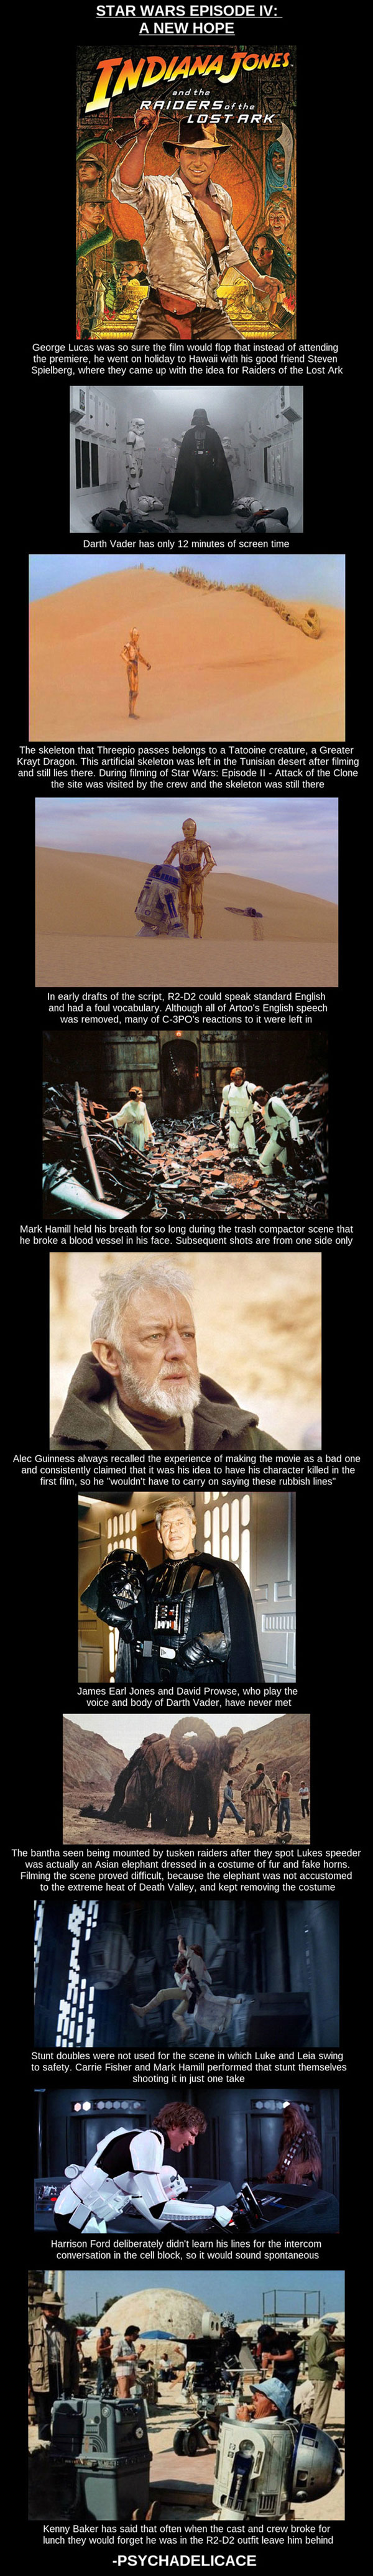 star_wars_a_new_hope_facts-1